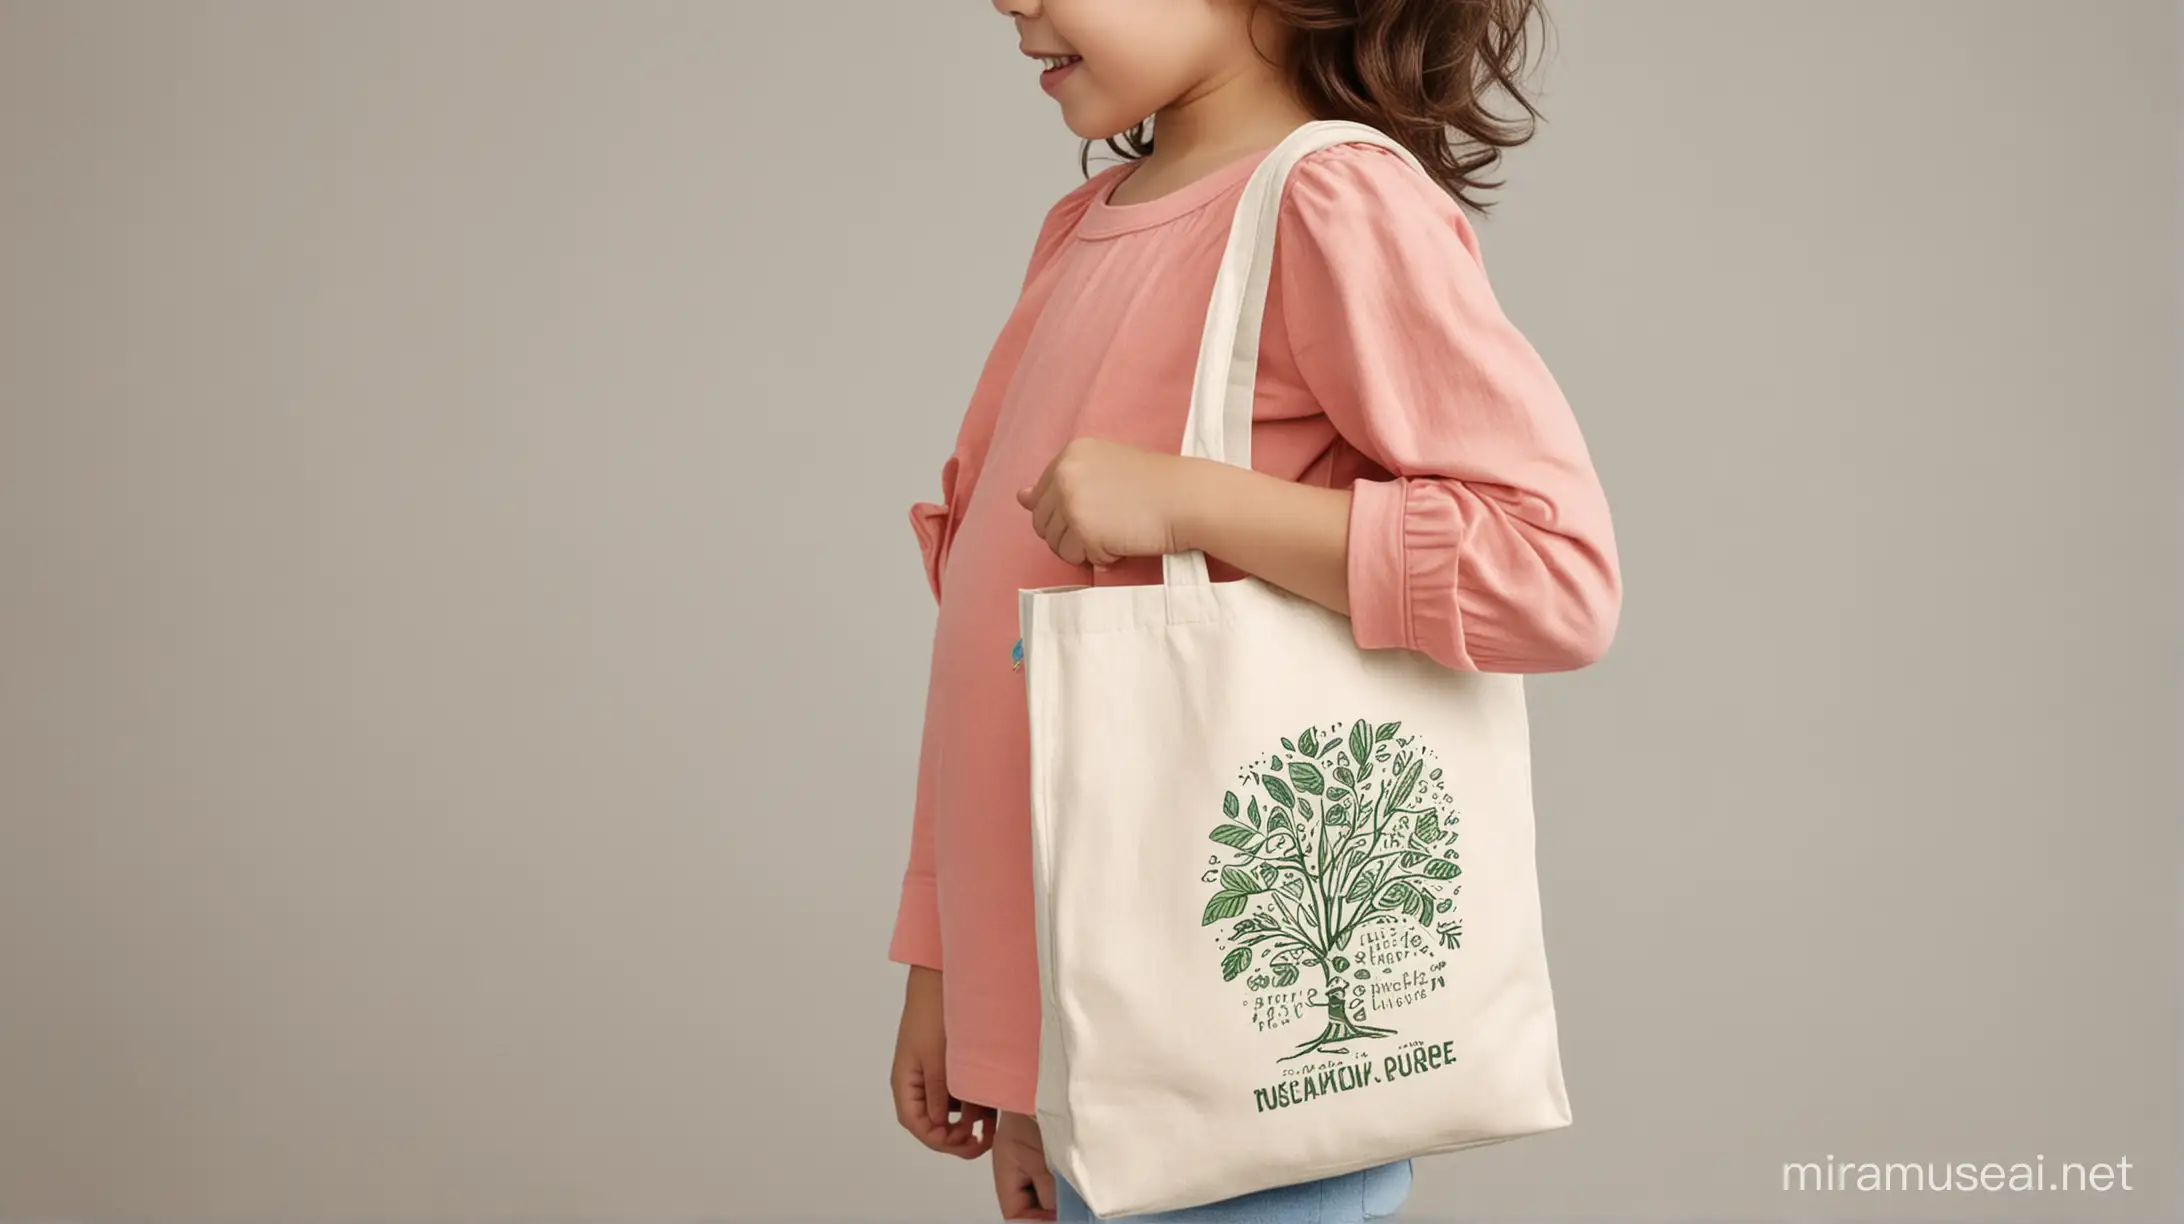 toddler with eco tote bag on shoulder side view mockup photo